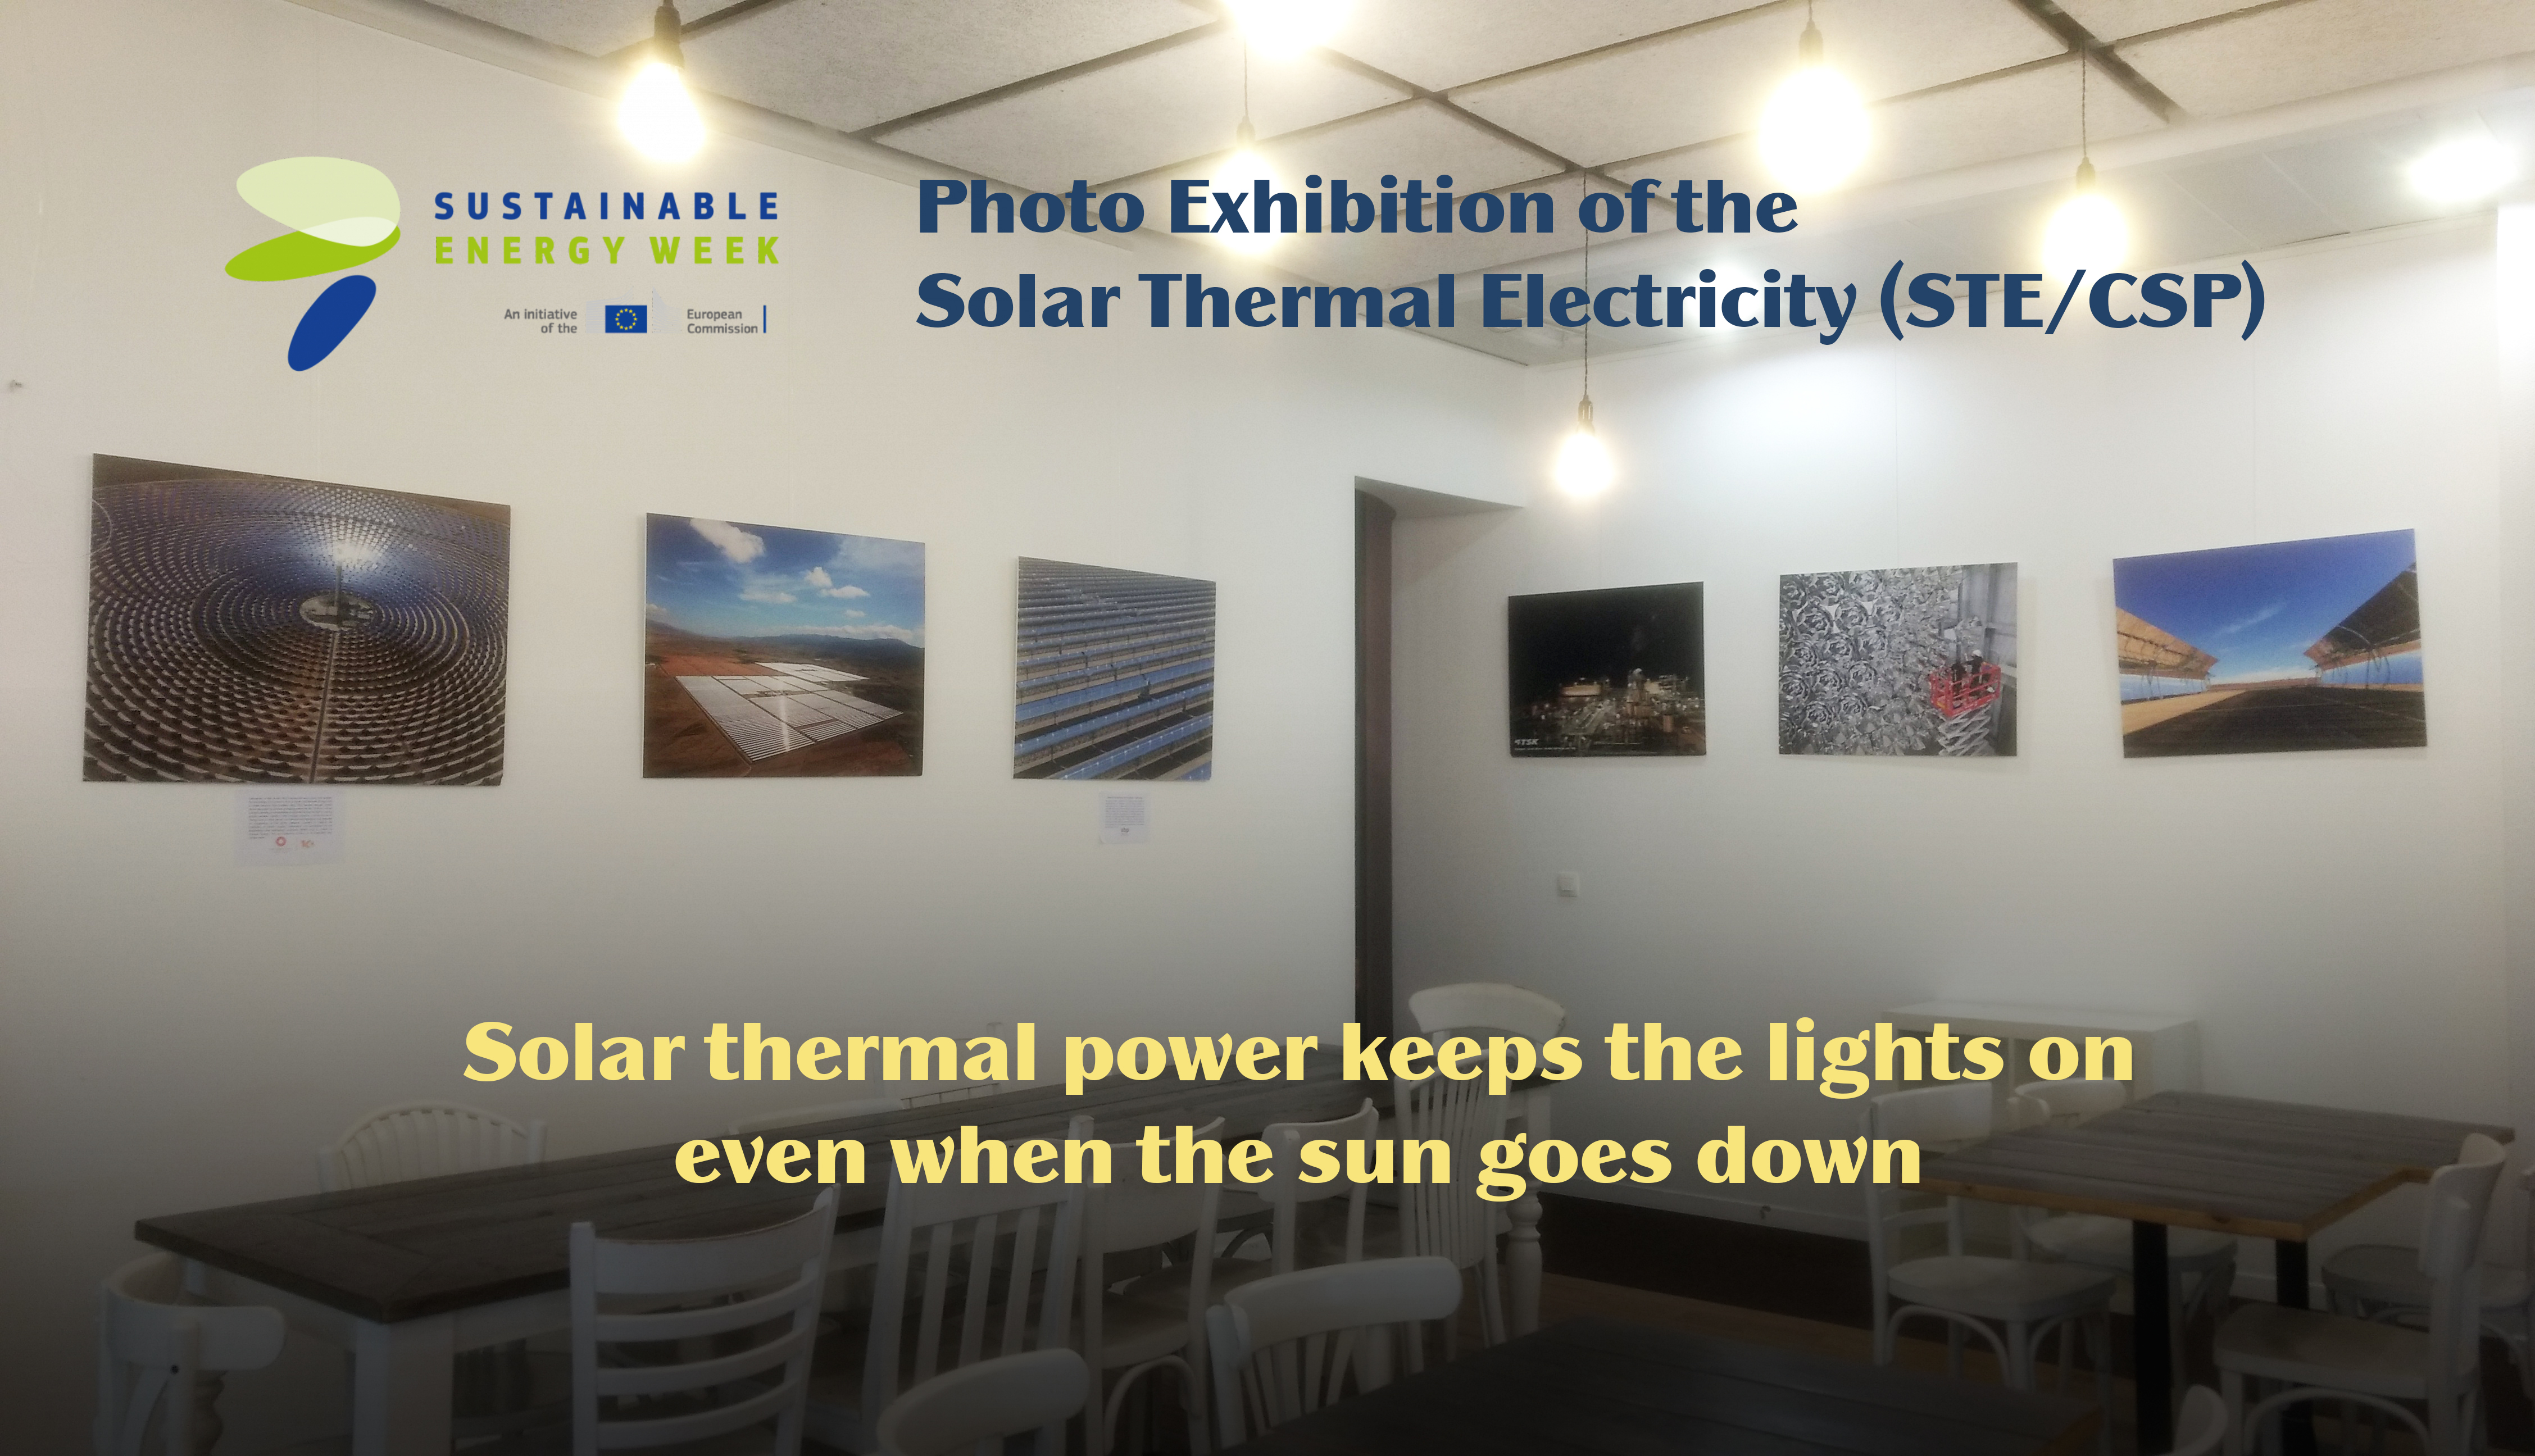 EUSEW Energy Days - Photo Exhibition of the Solar Thermal Electricity (STE/CSP): Solar thermal power keeps the lights on even when the sun goes down